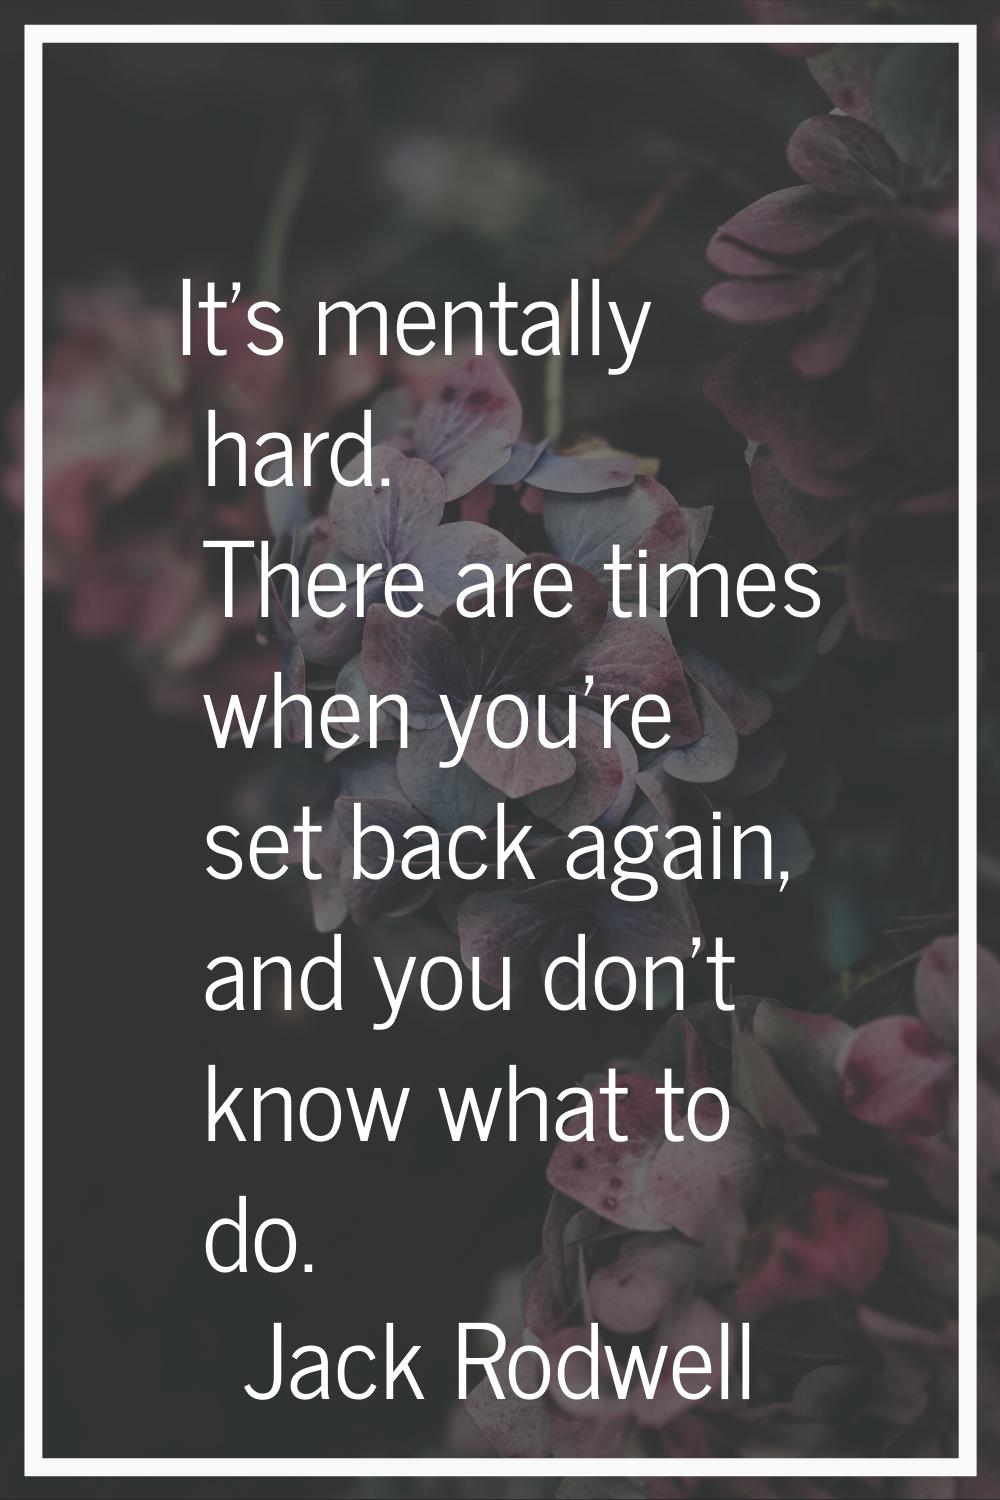 It's mentally hard. There are times when you're set back again, and you don't know what to do.